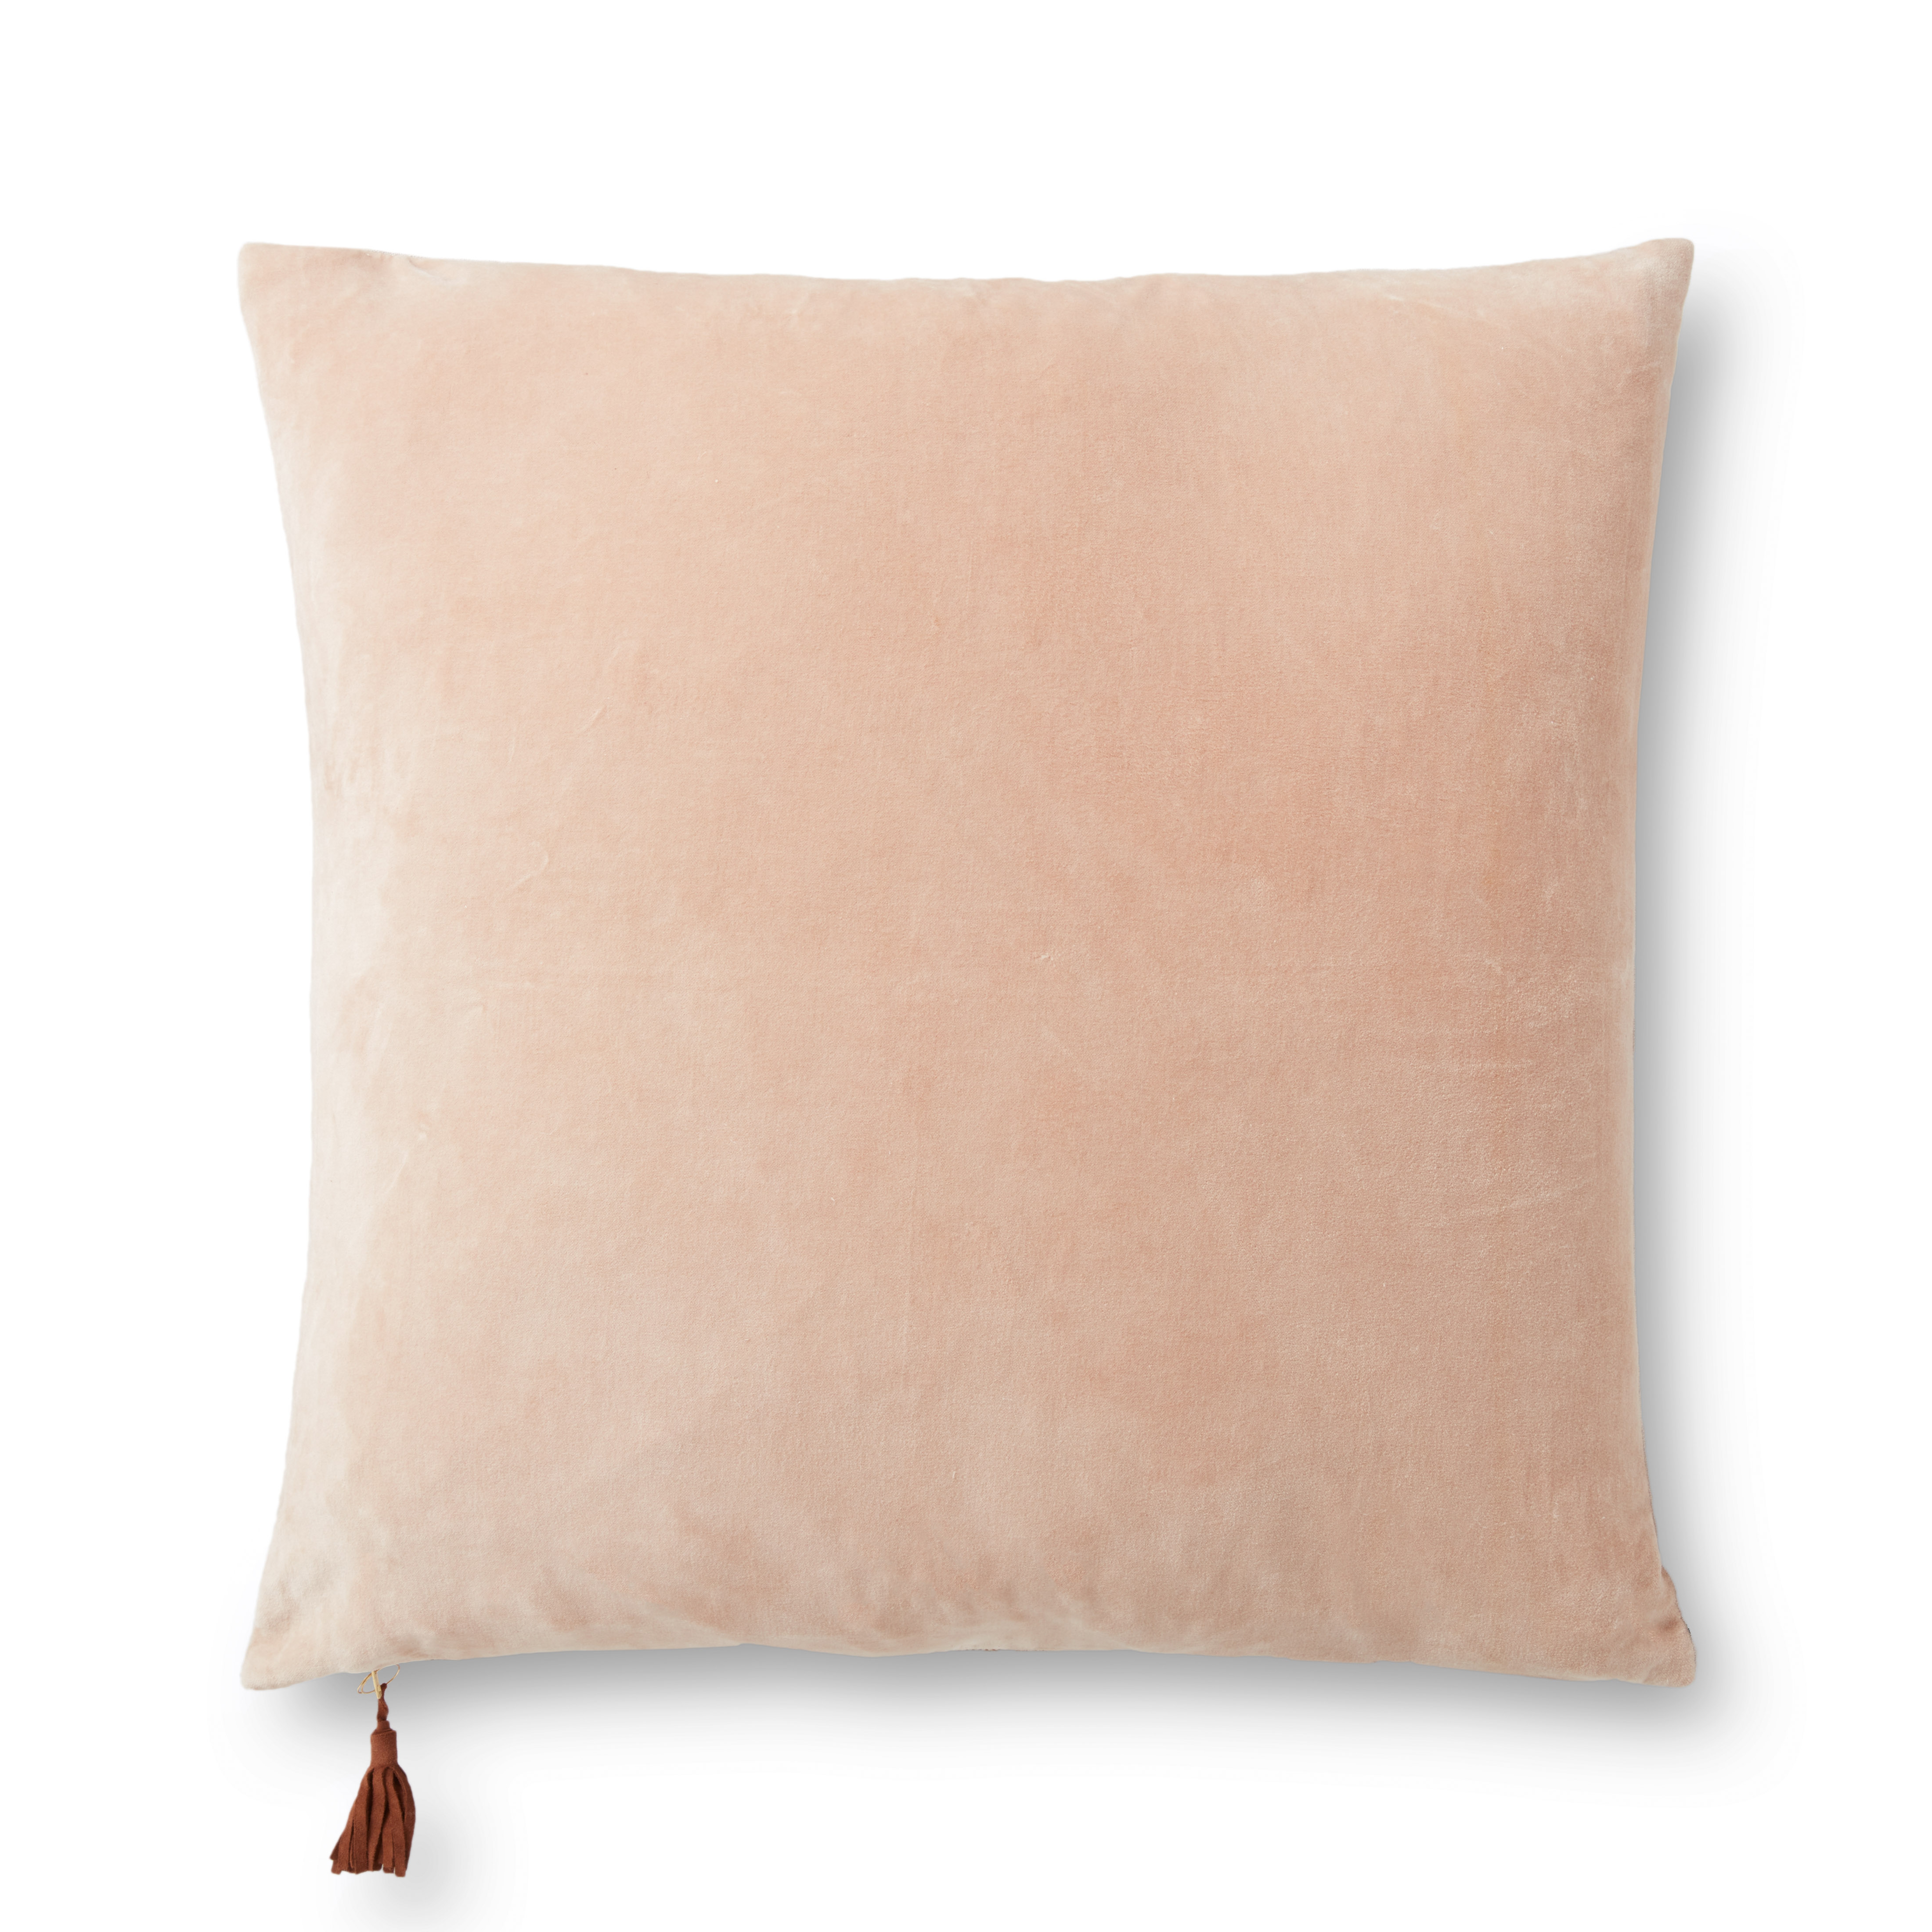 SAND / IVORY 22" x 22" Pillow Cover w/Poly Insert - Magnolia Home by Joana Gaines Crafted by Loloi Rugs